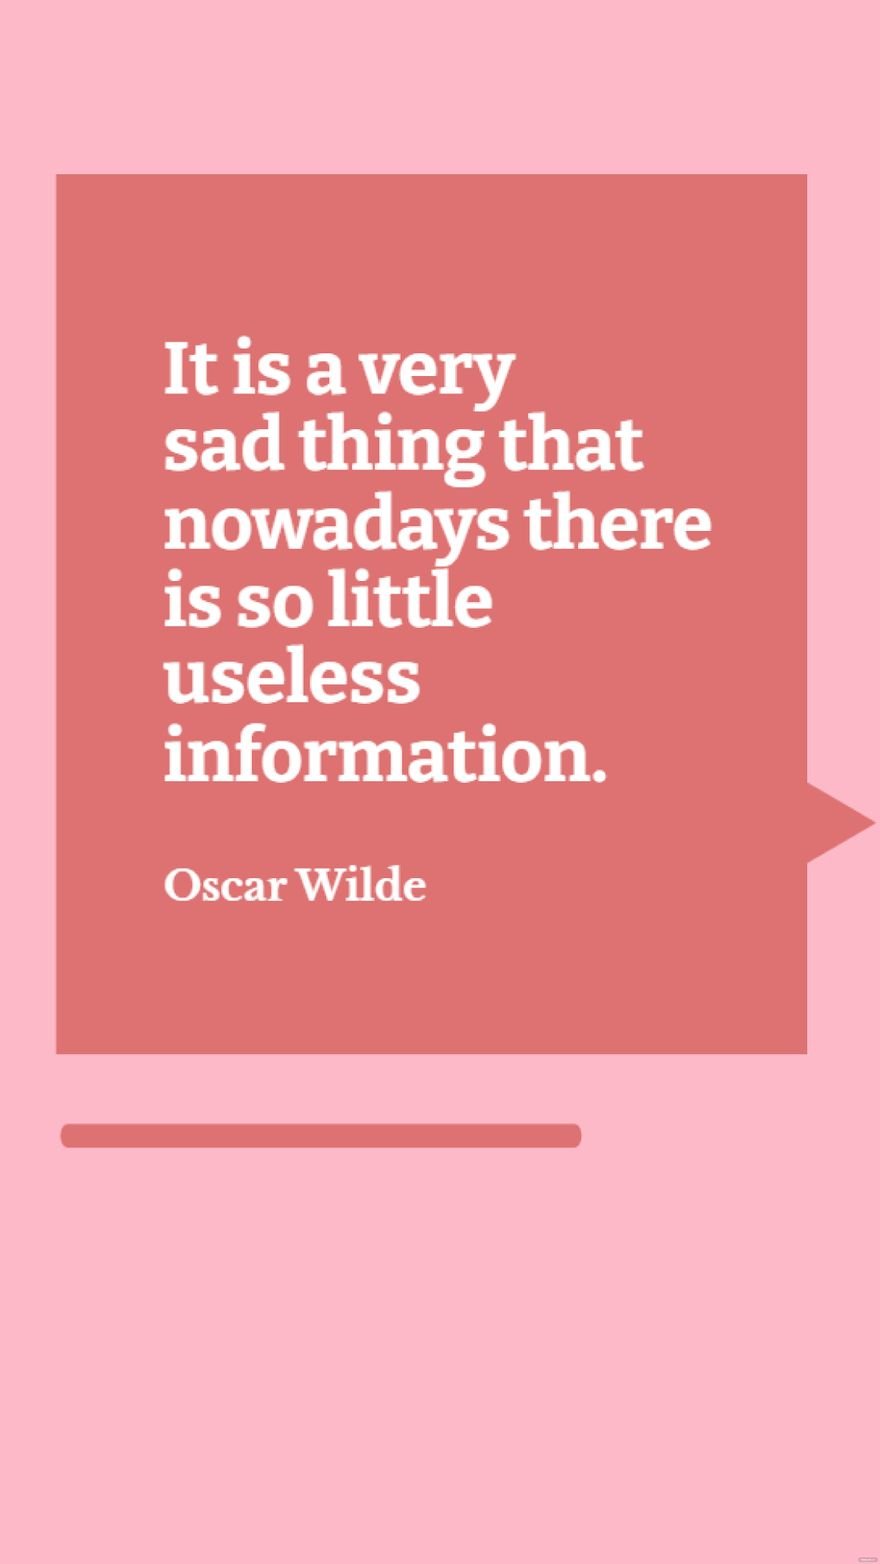 Oscar Wilde - It is a very sad thing that nowadays there is so little useless information.